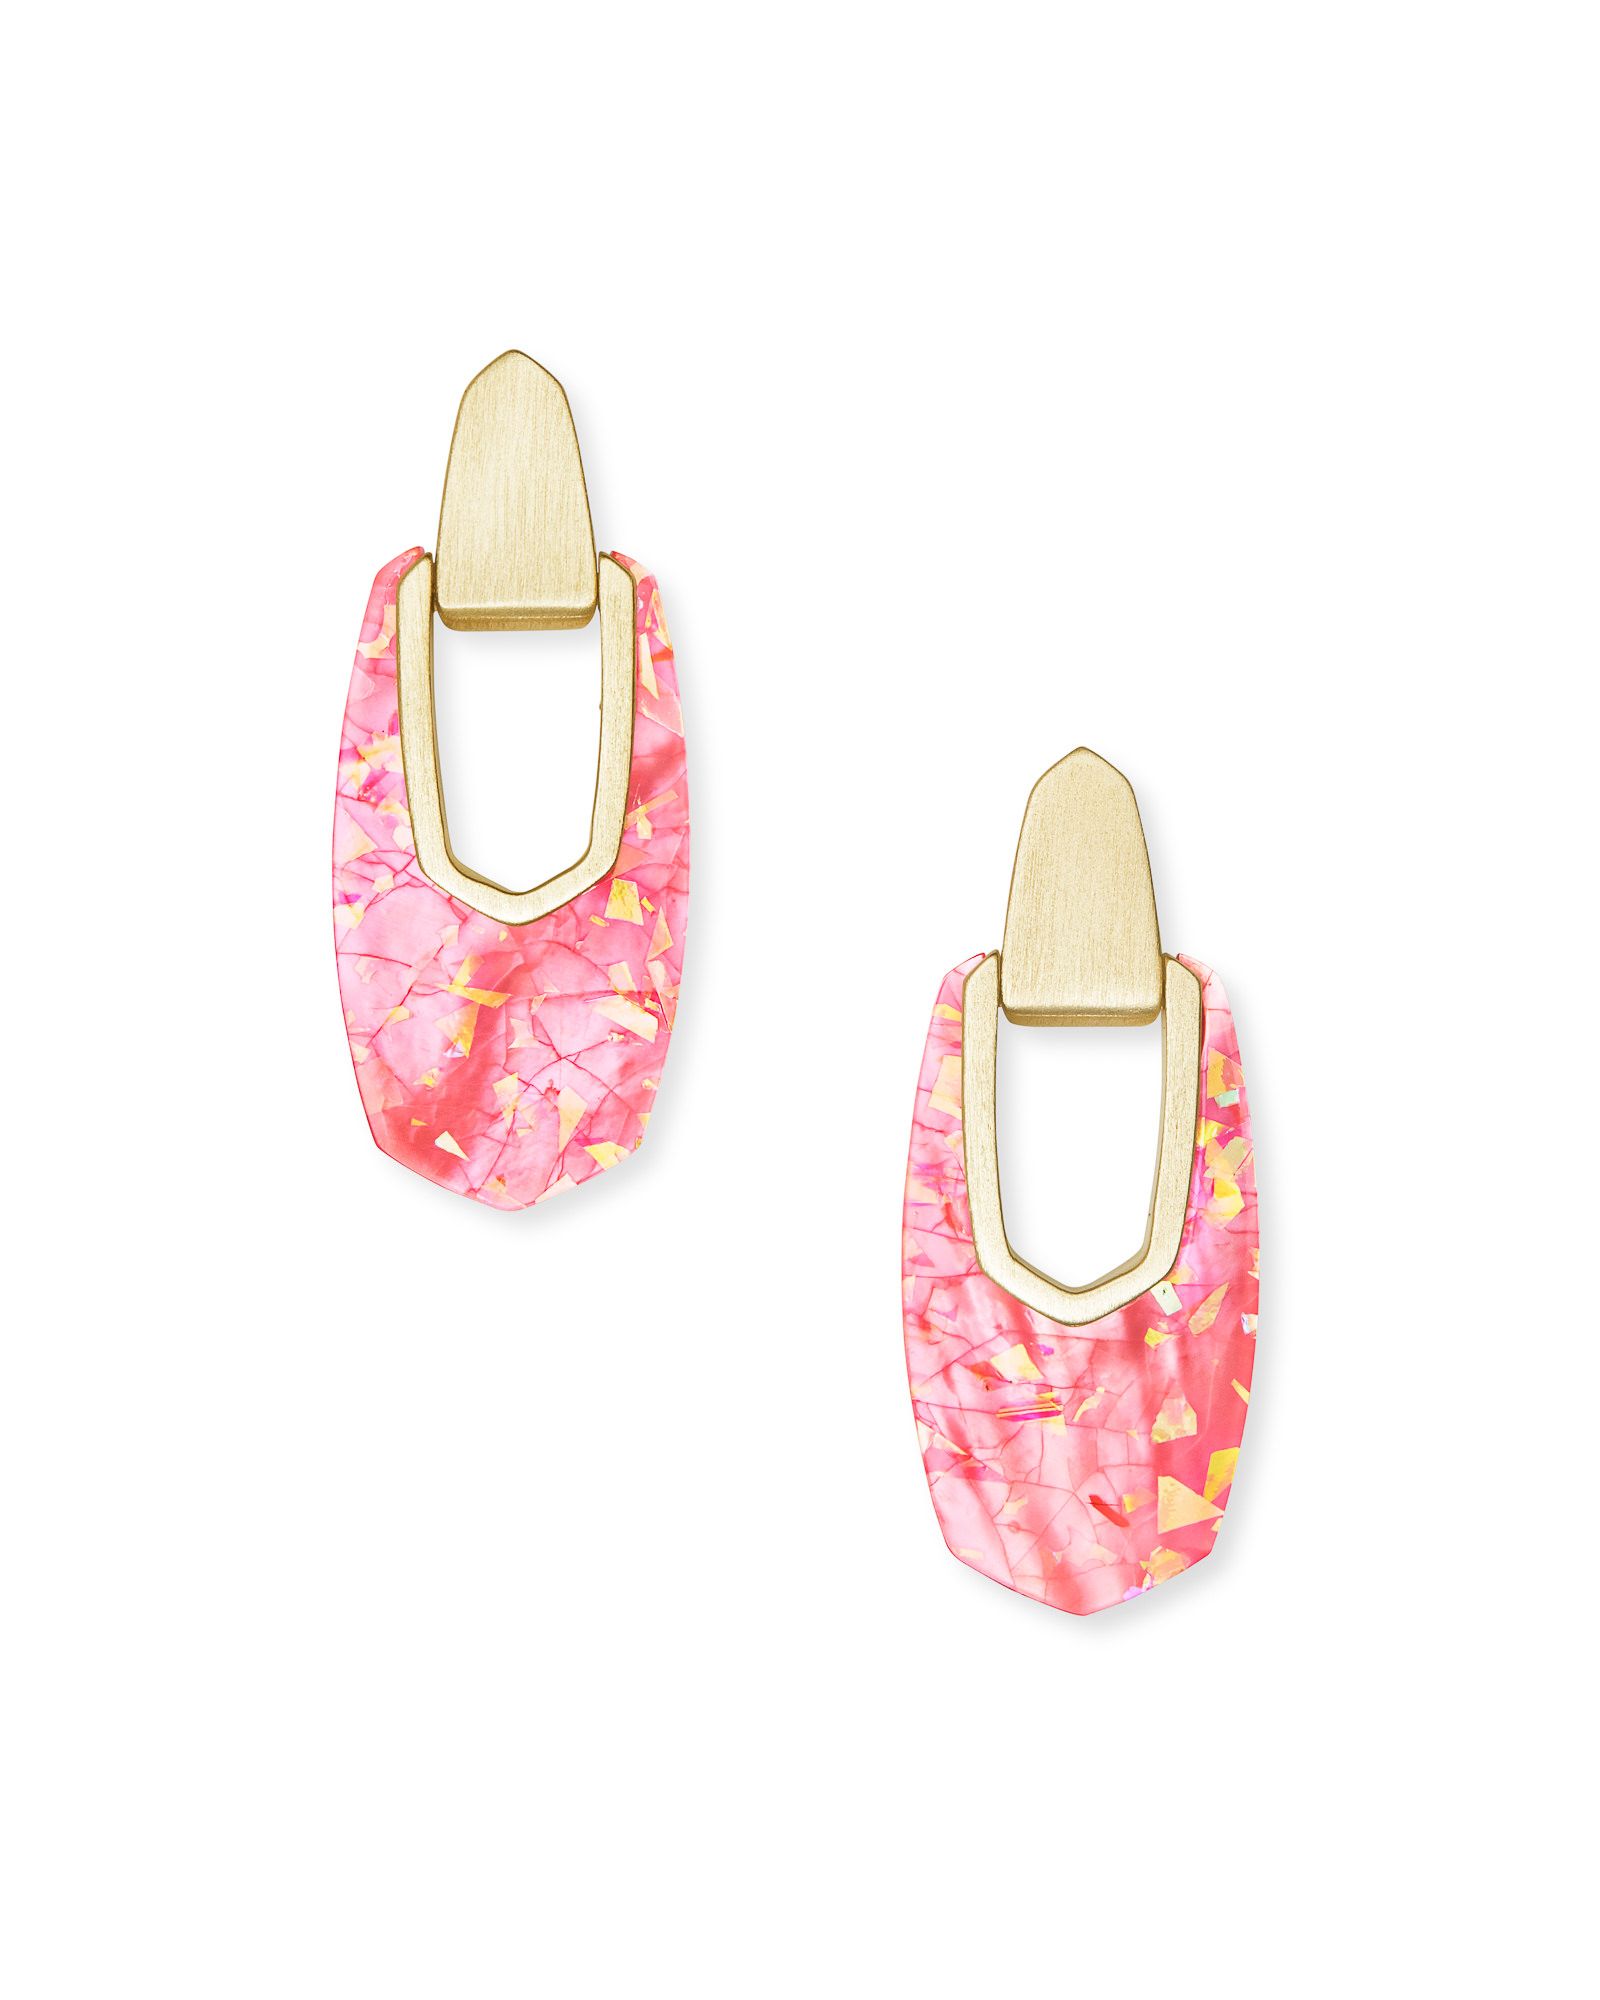 Kailyn Gold Drop Earrings in Iridescent Coral Illusion | Kendra Scott